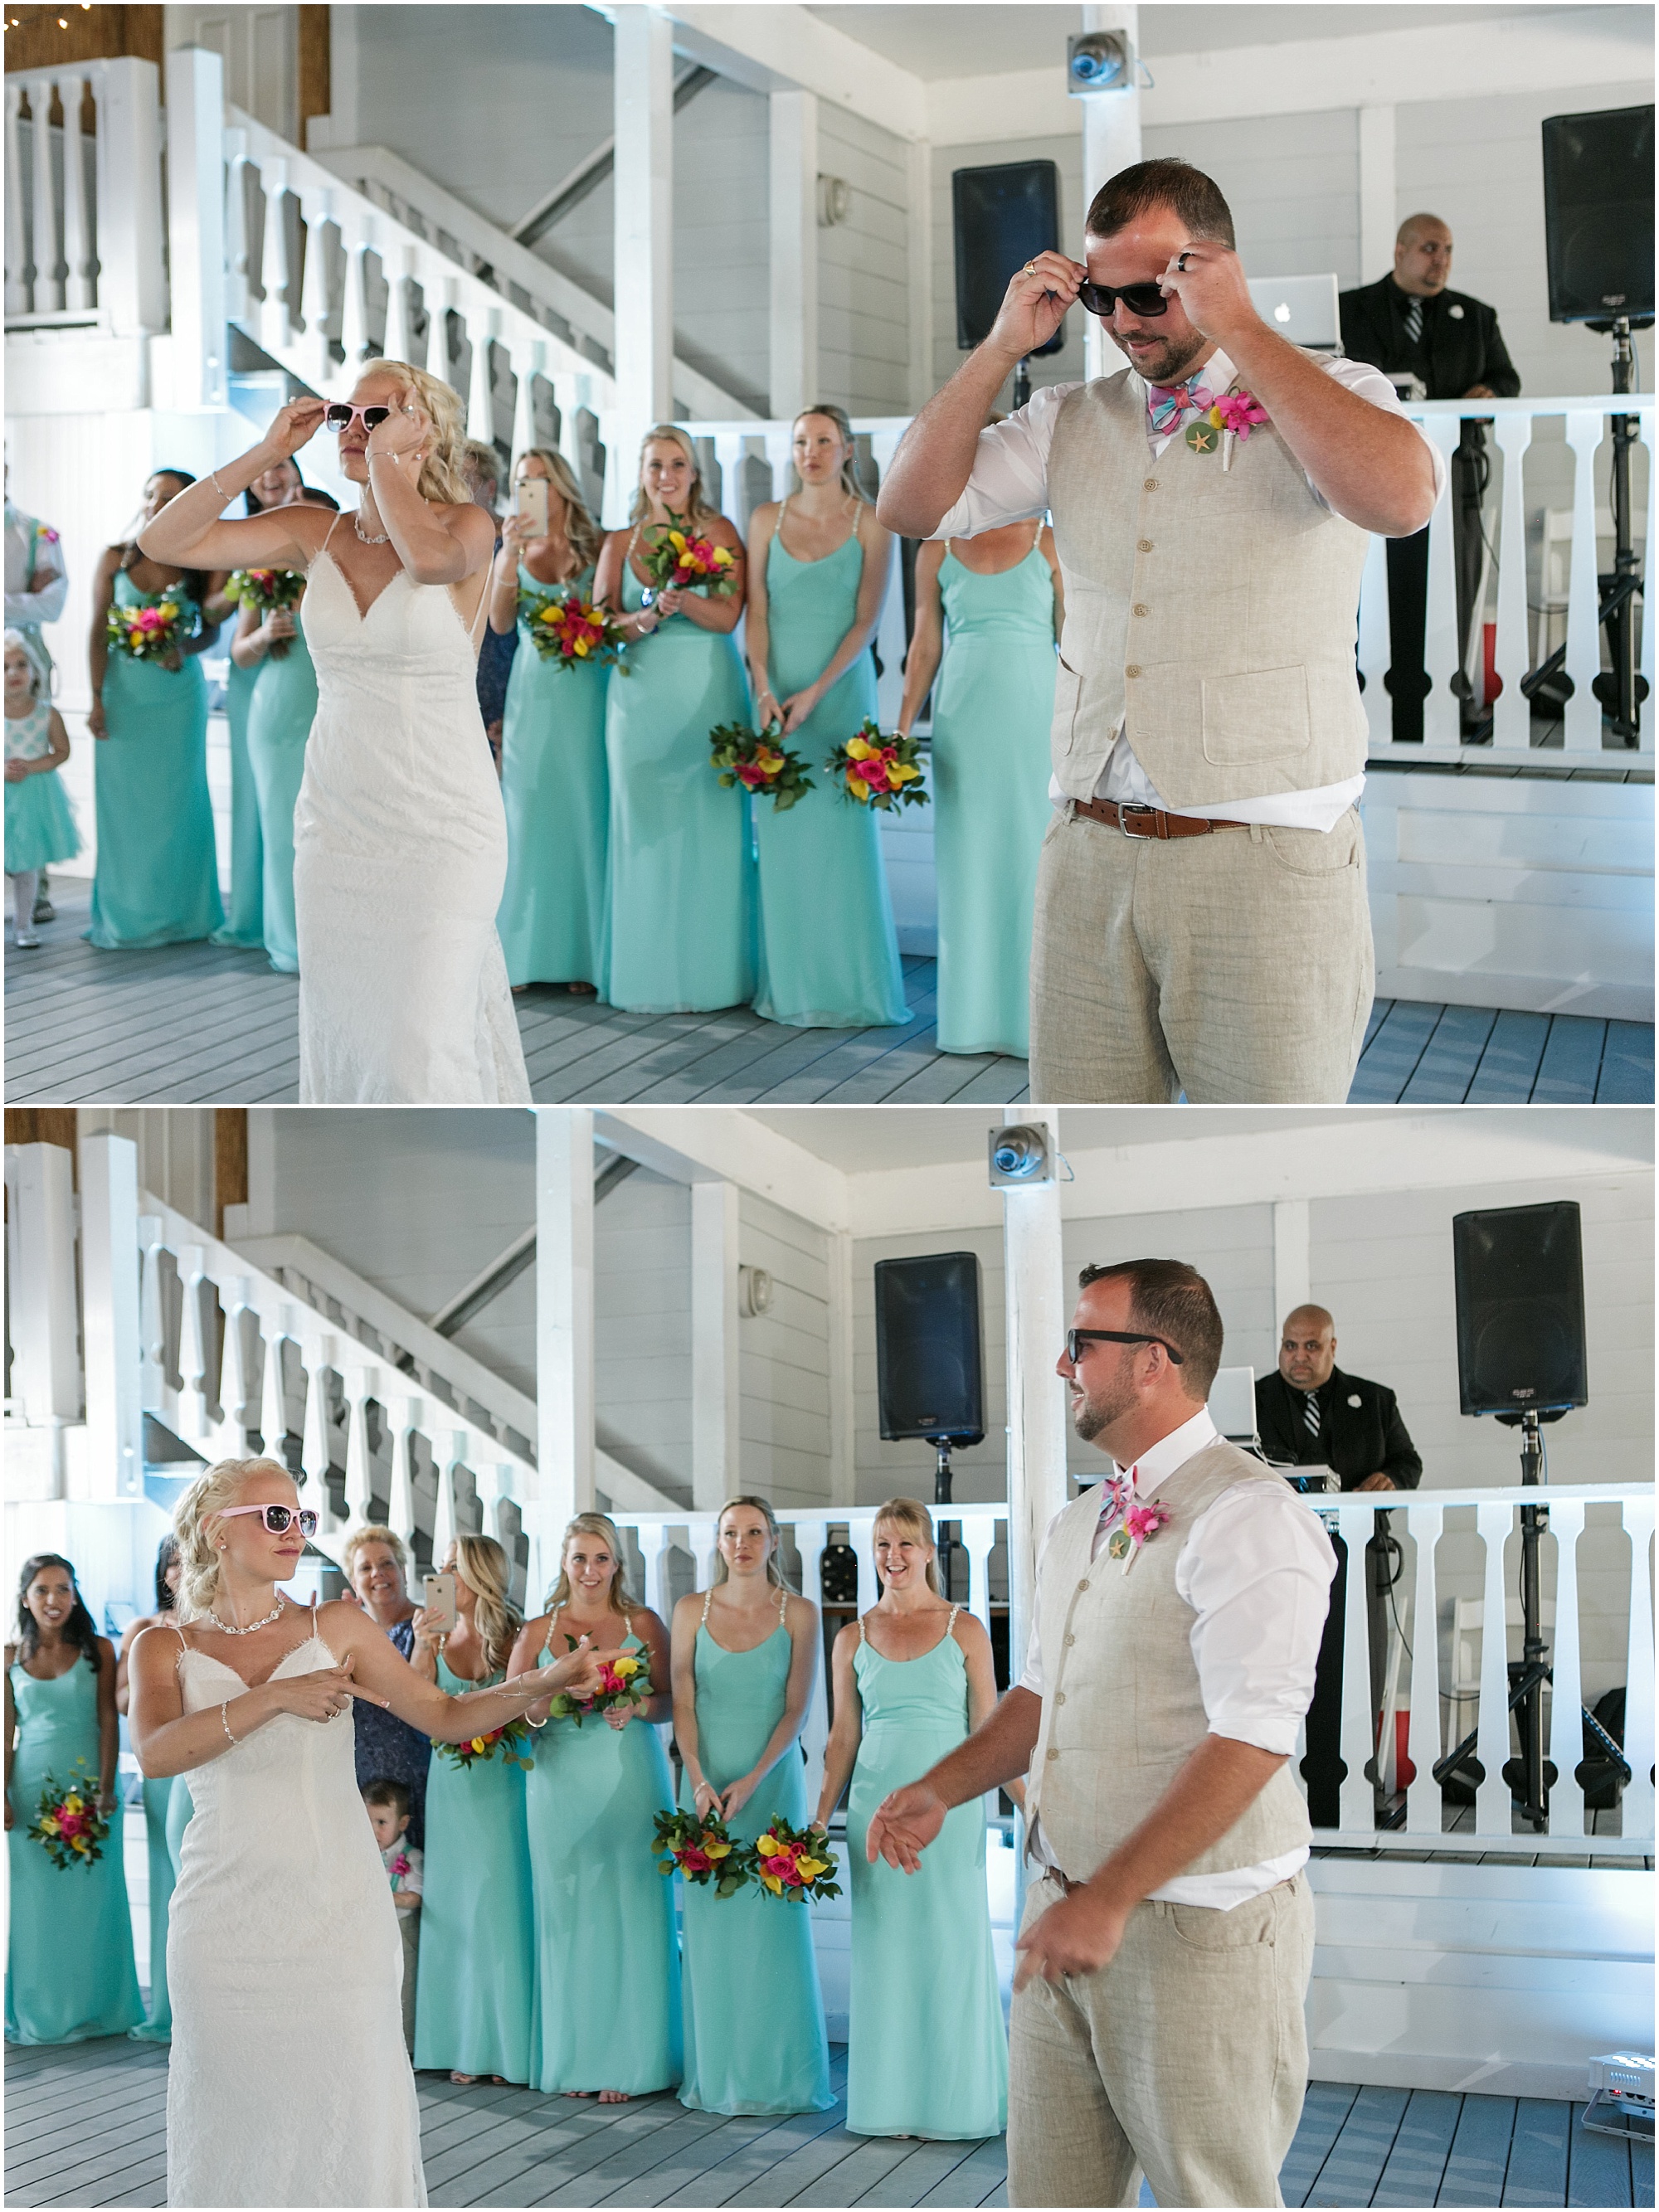 Bride and good get ready to surprise their guests with a choreographed dance.